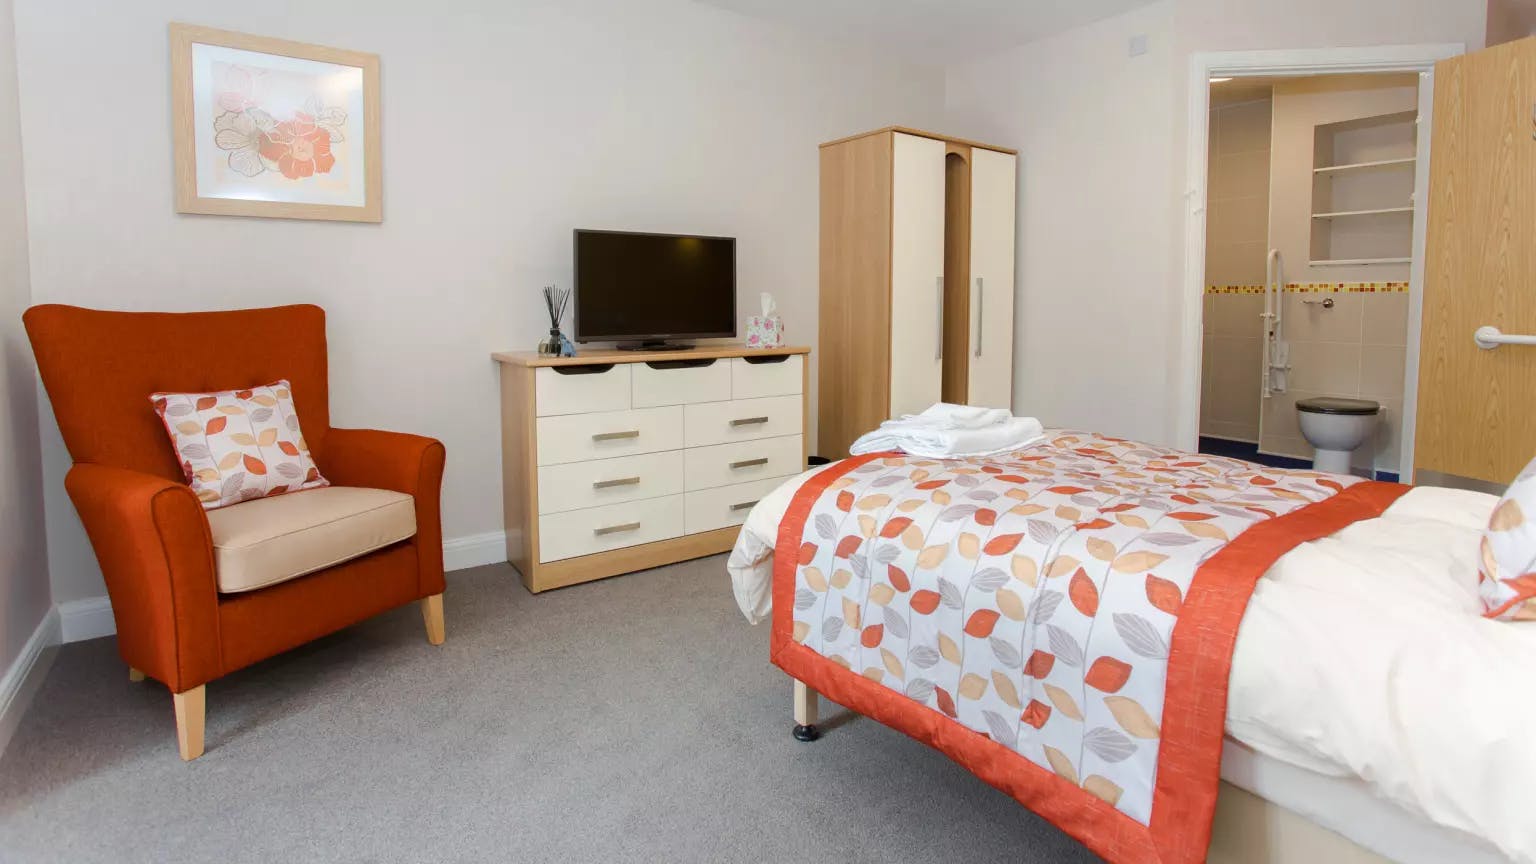 Bedroom of Anson Court care home in Welwyn Garden City, Hertfordshire